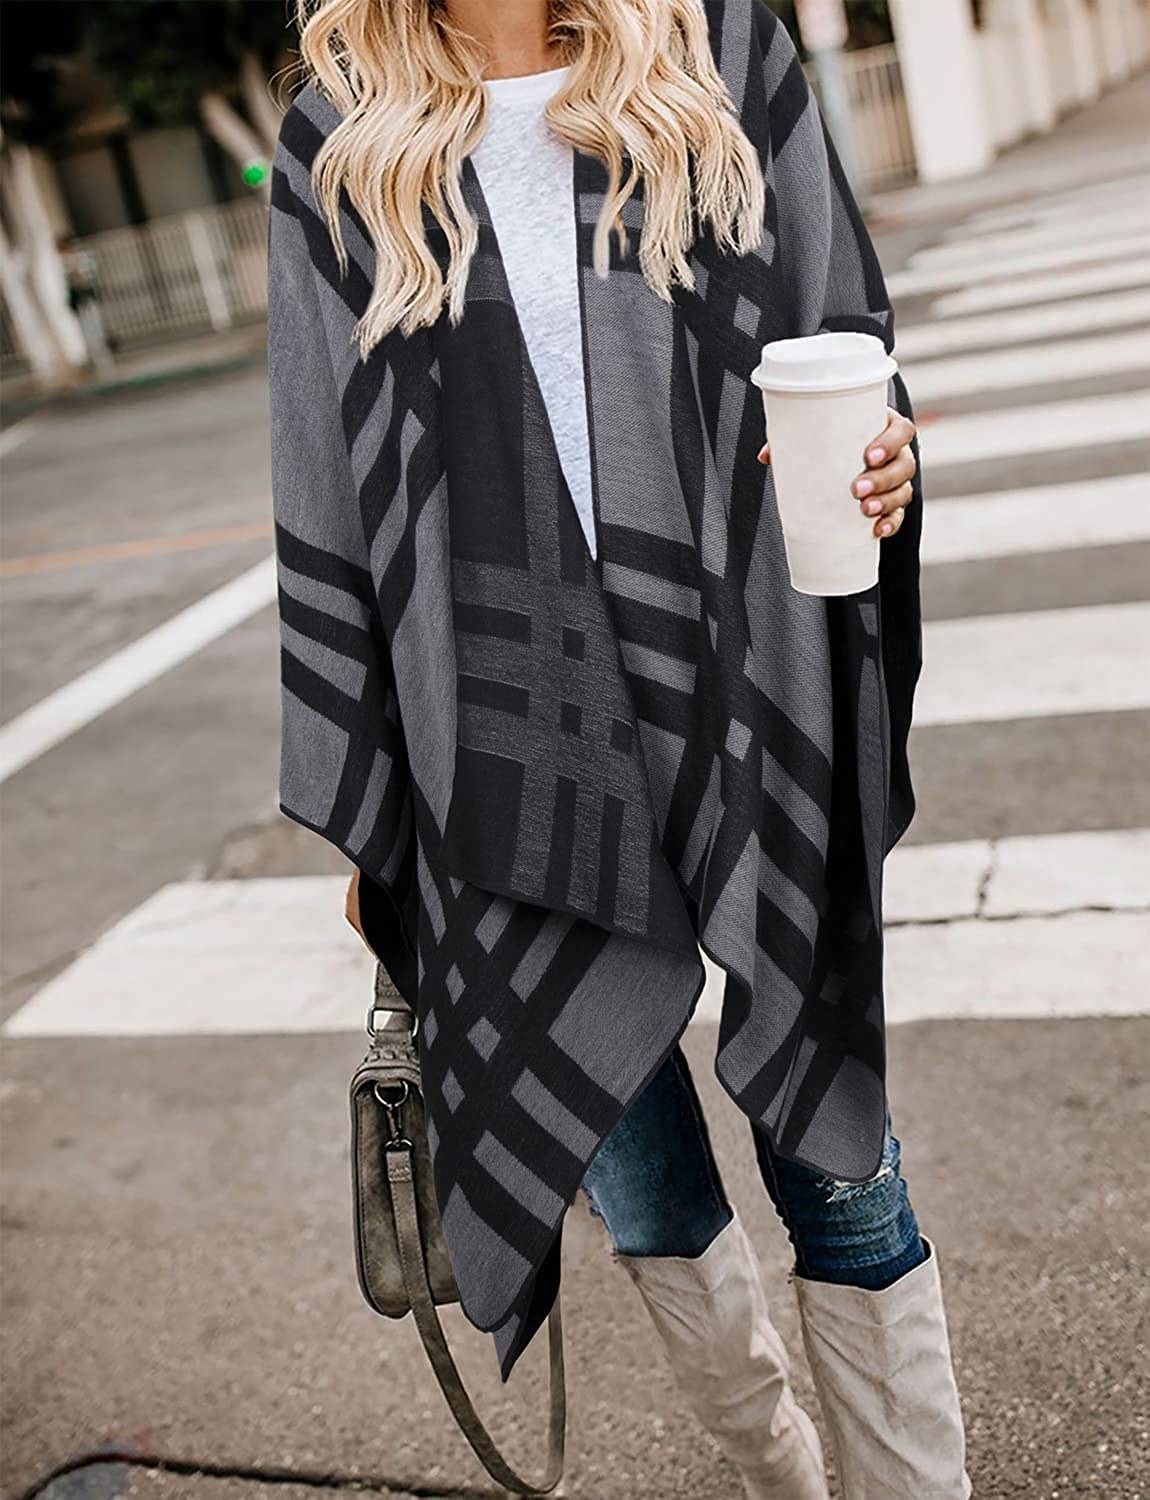 A person standing on the street wearing the oversized blanket shawl carrying coffee and a purse